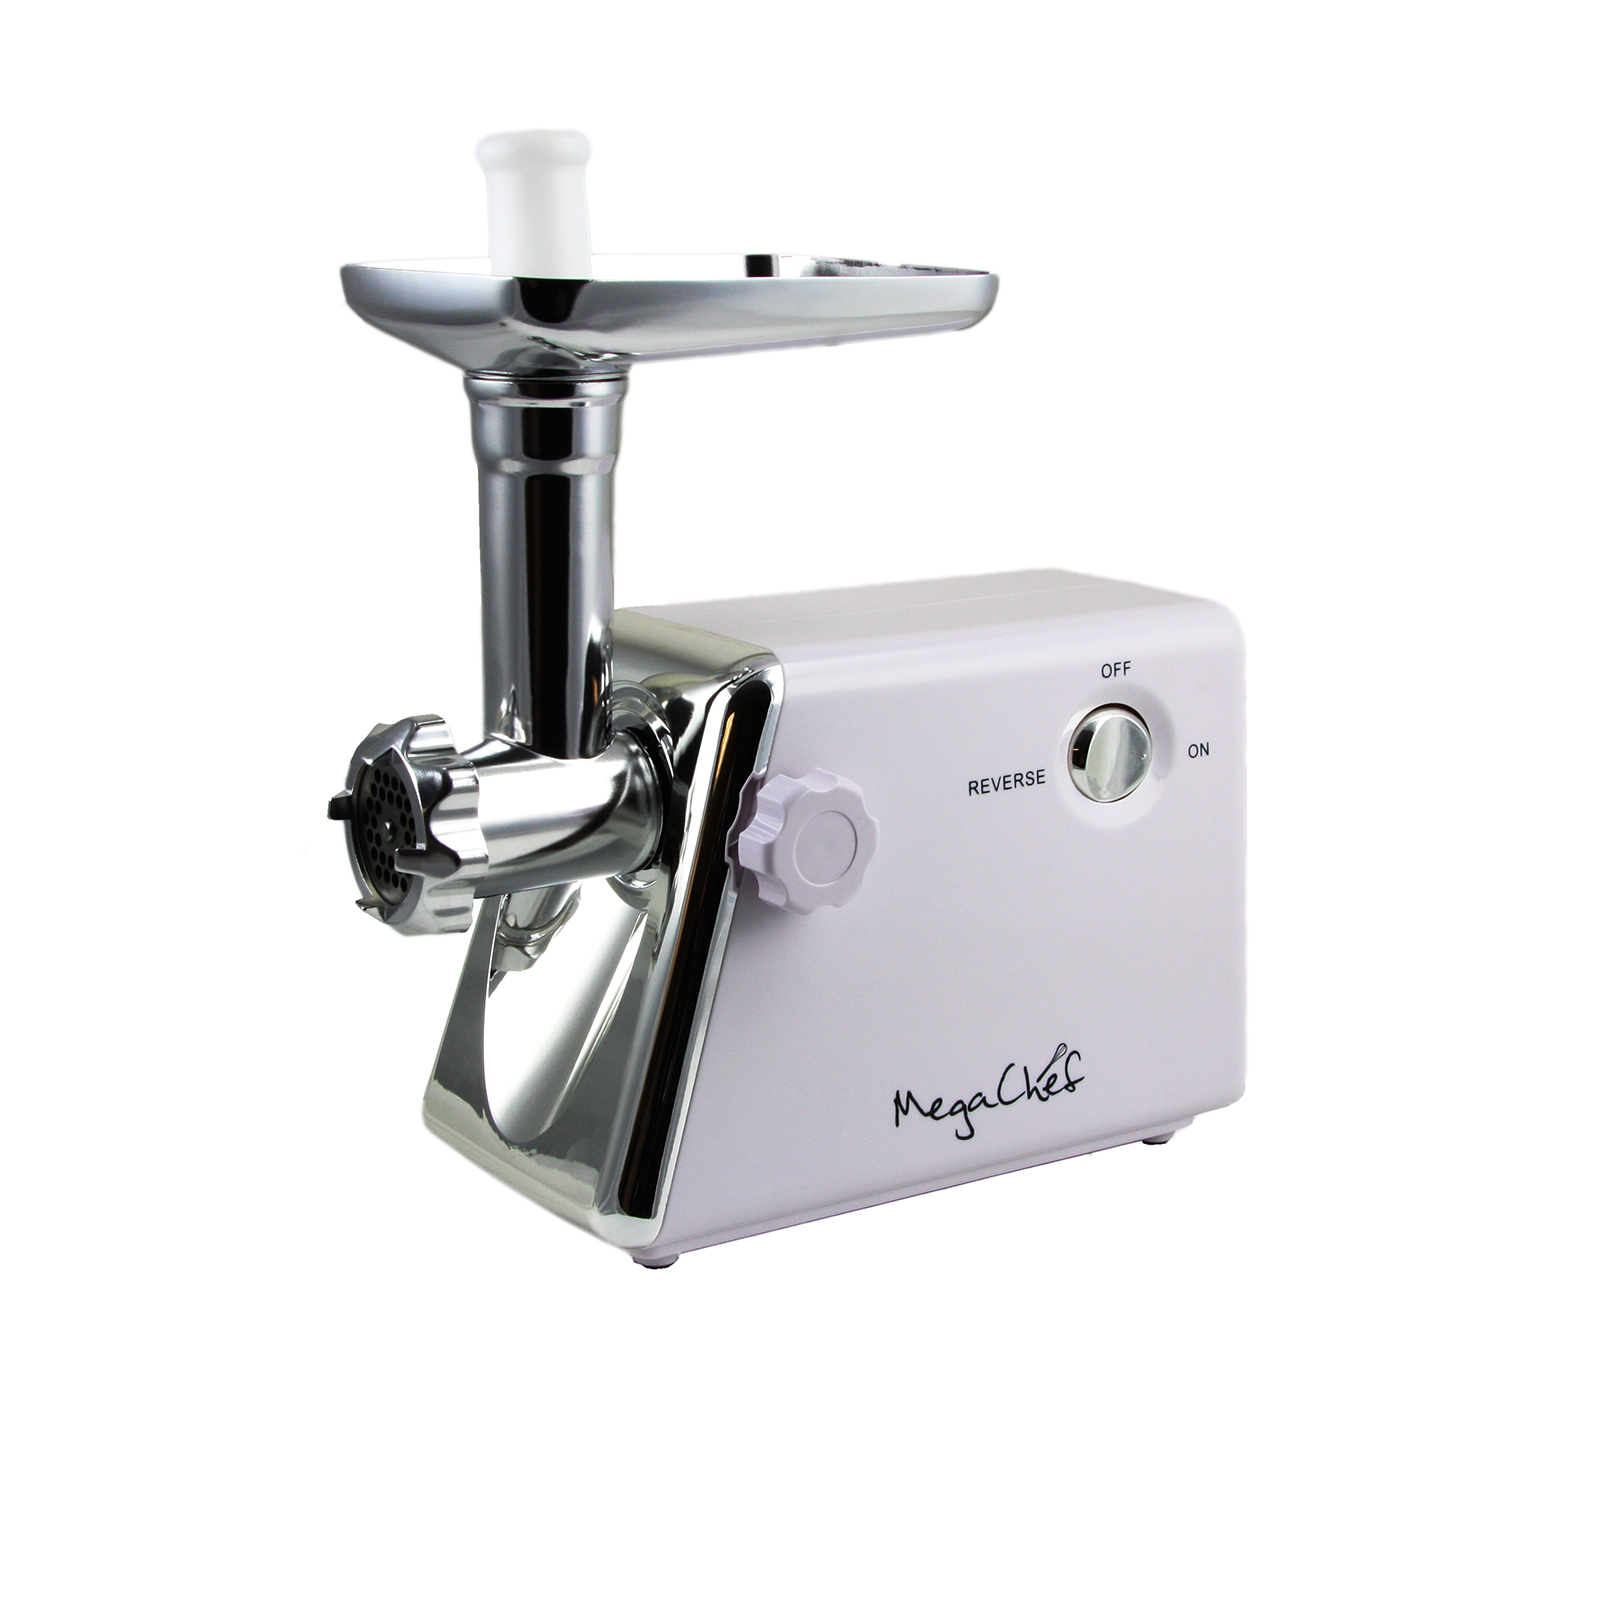 MegaChef 97096263M 1200 Watt Ultra Powerful Automatic Meat Grinder for Household Use